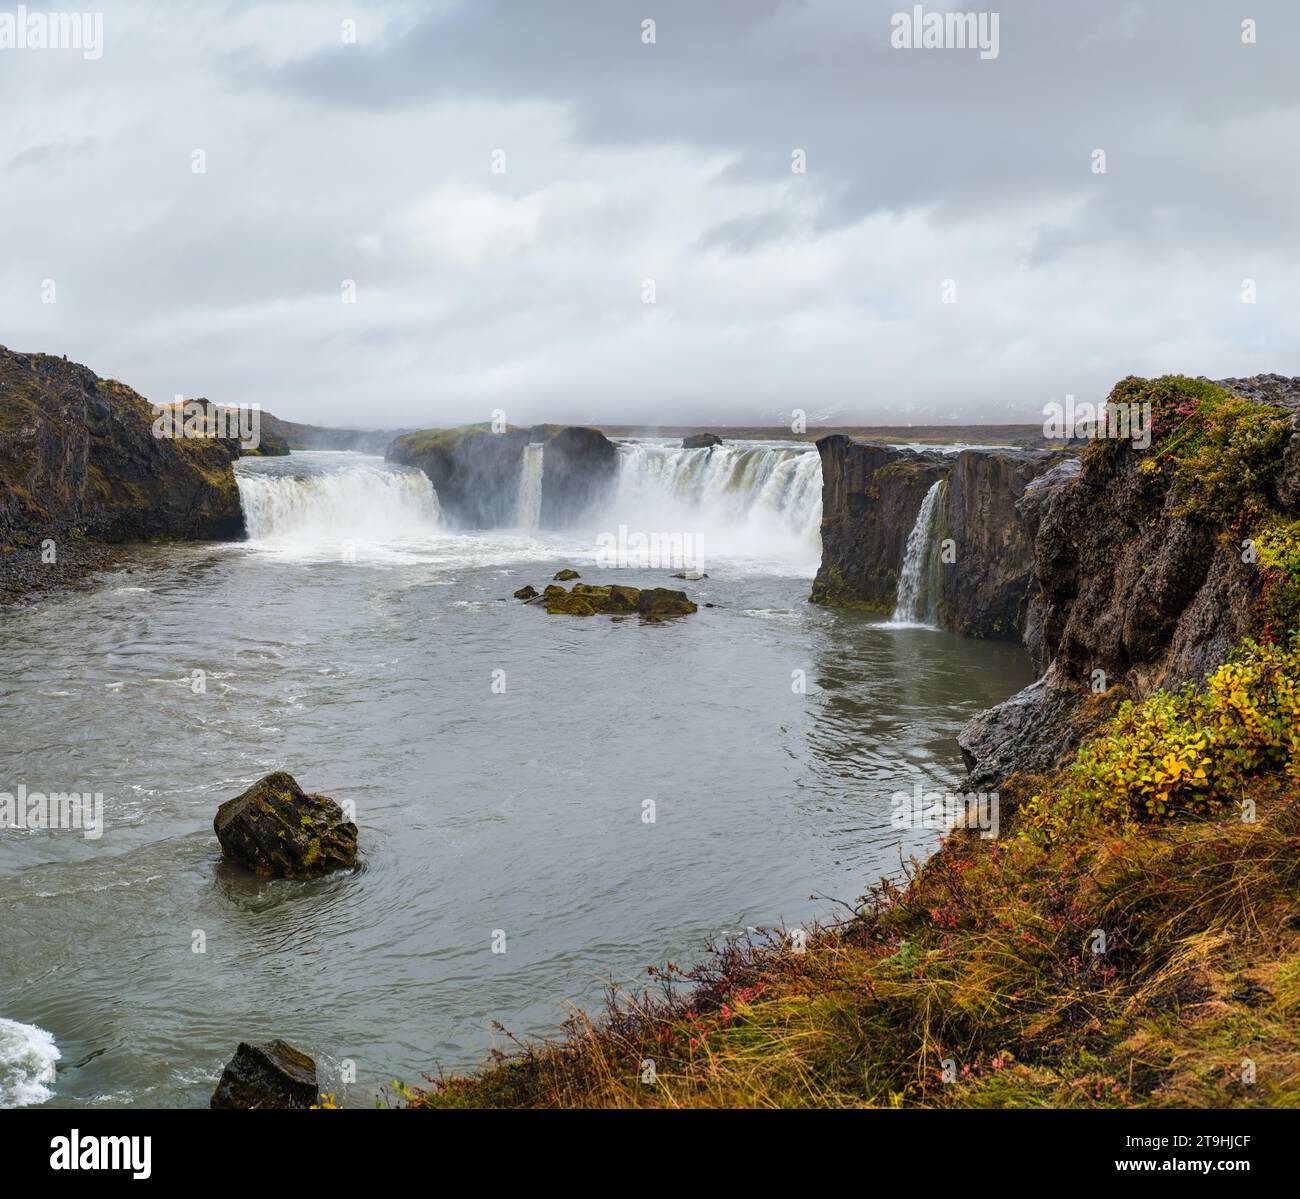 Picturesque full of water big waterfall Godafoss autumn dull day view, north Iceland. Stock Photo